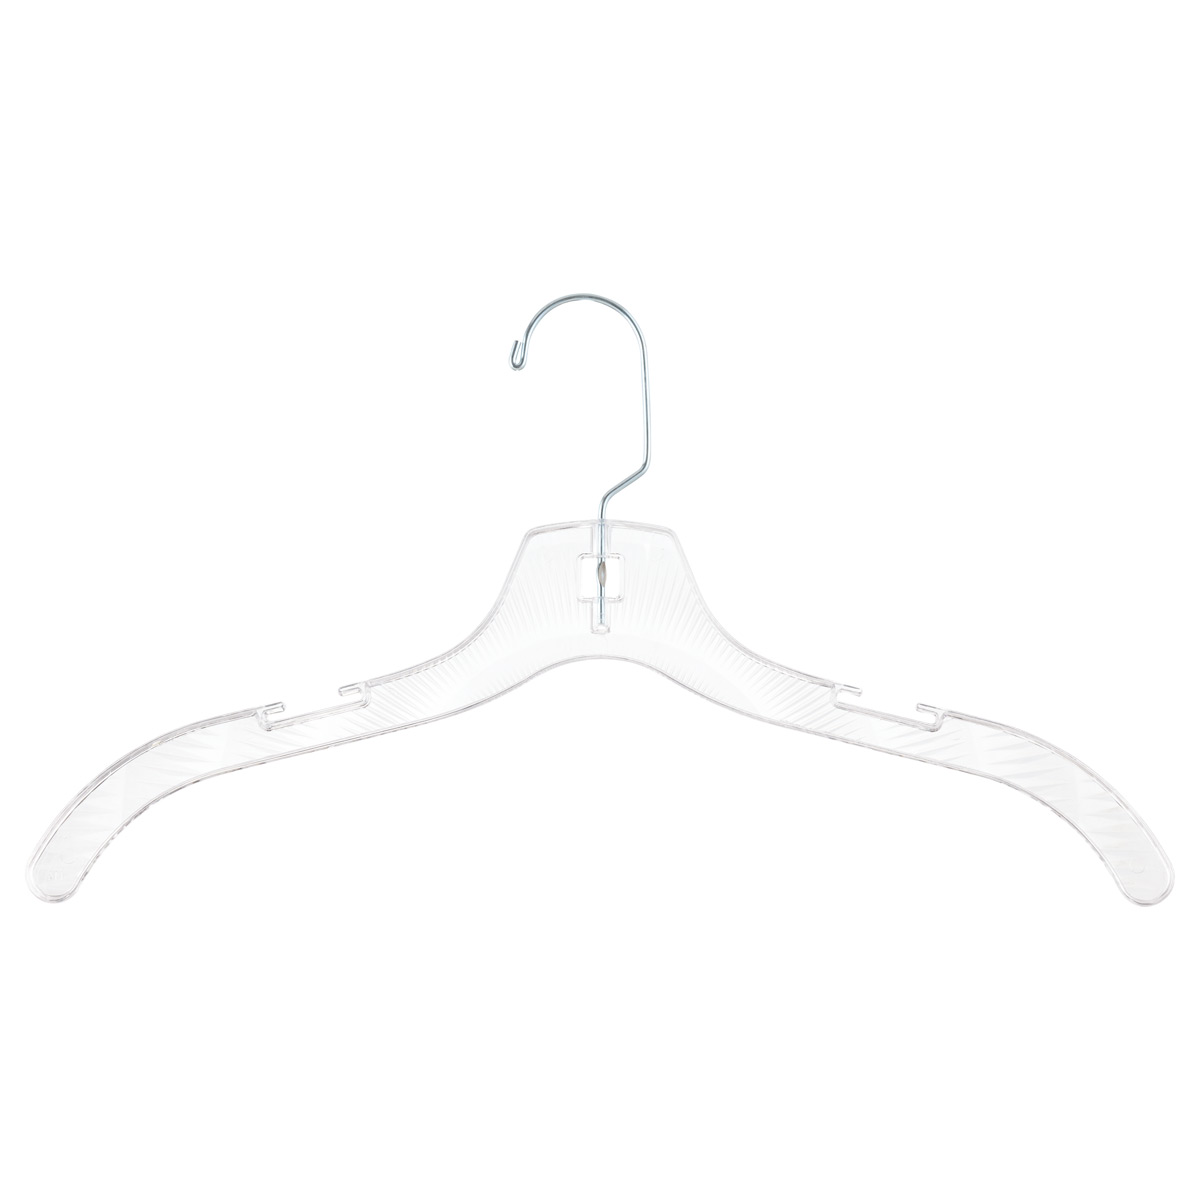 Crystal Clear Dress Hangers Pkg/5 | The Container Store